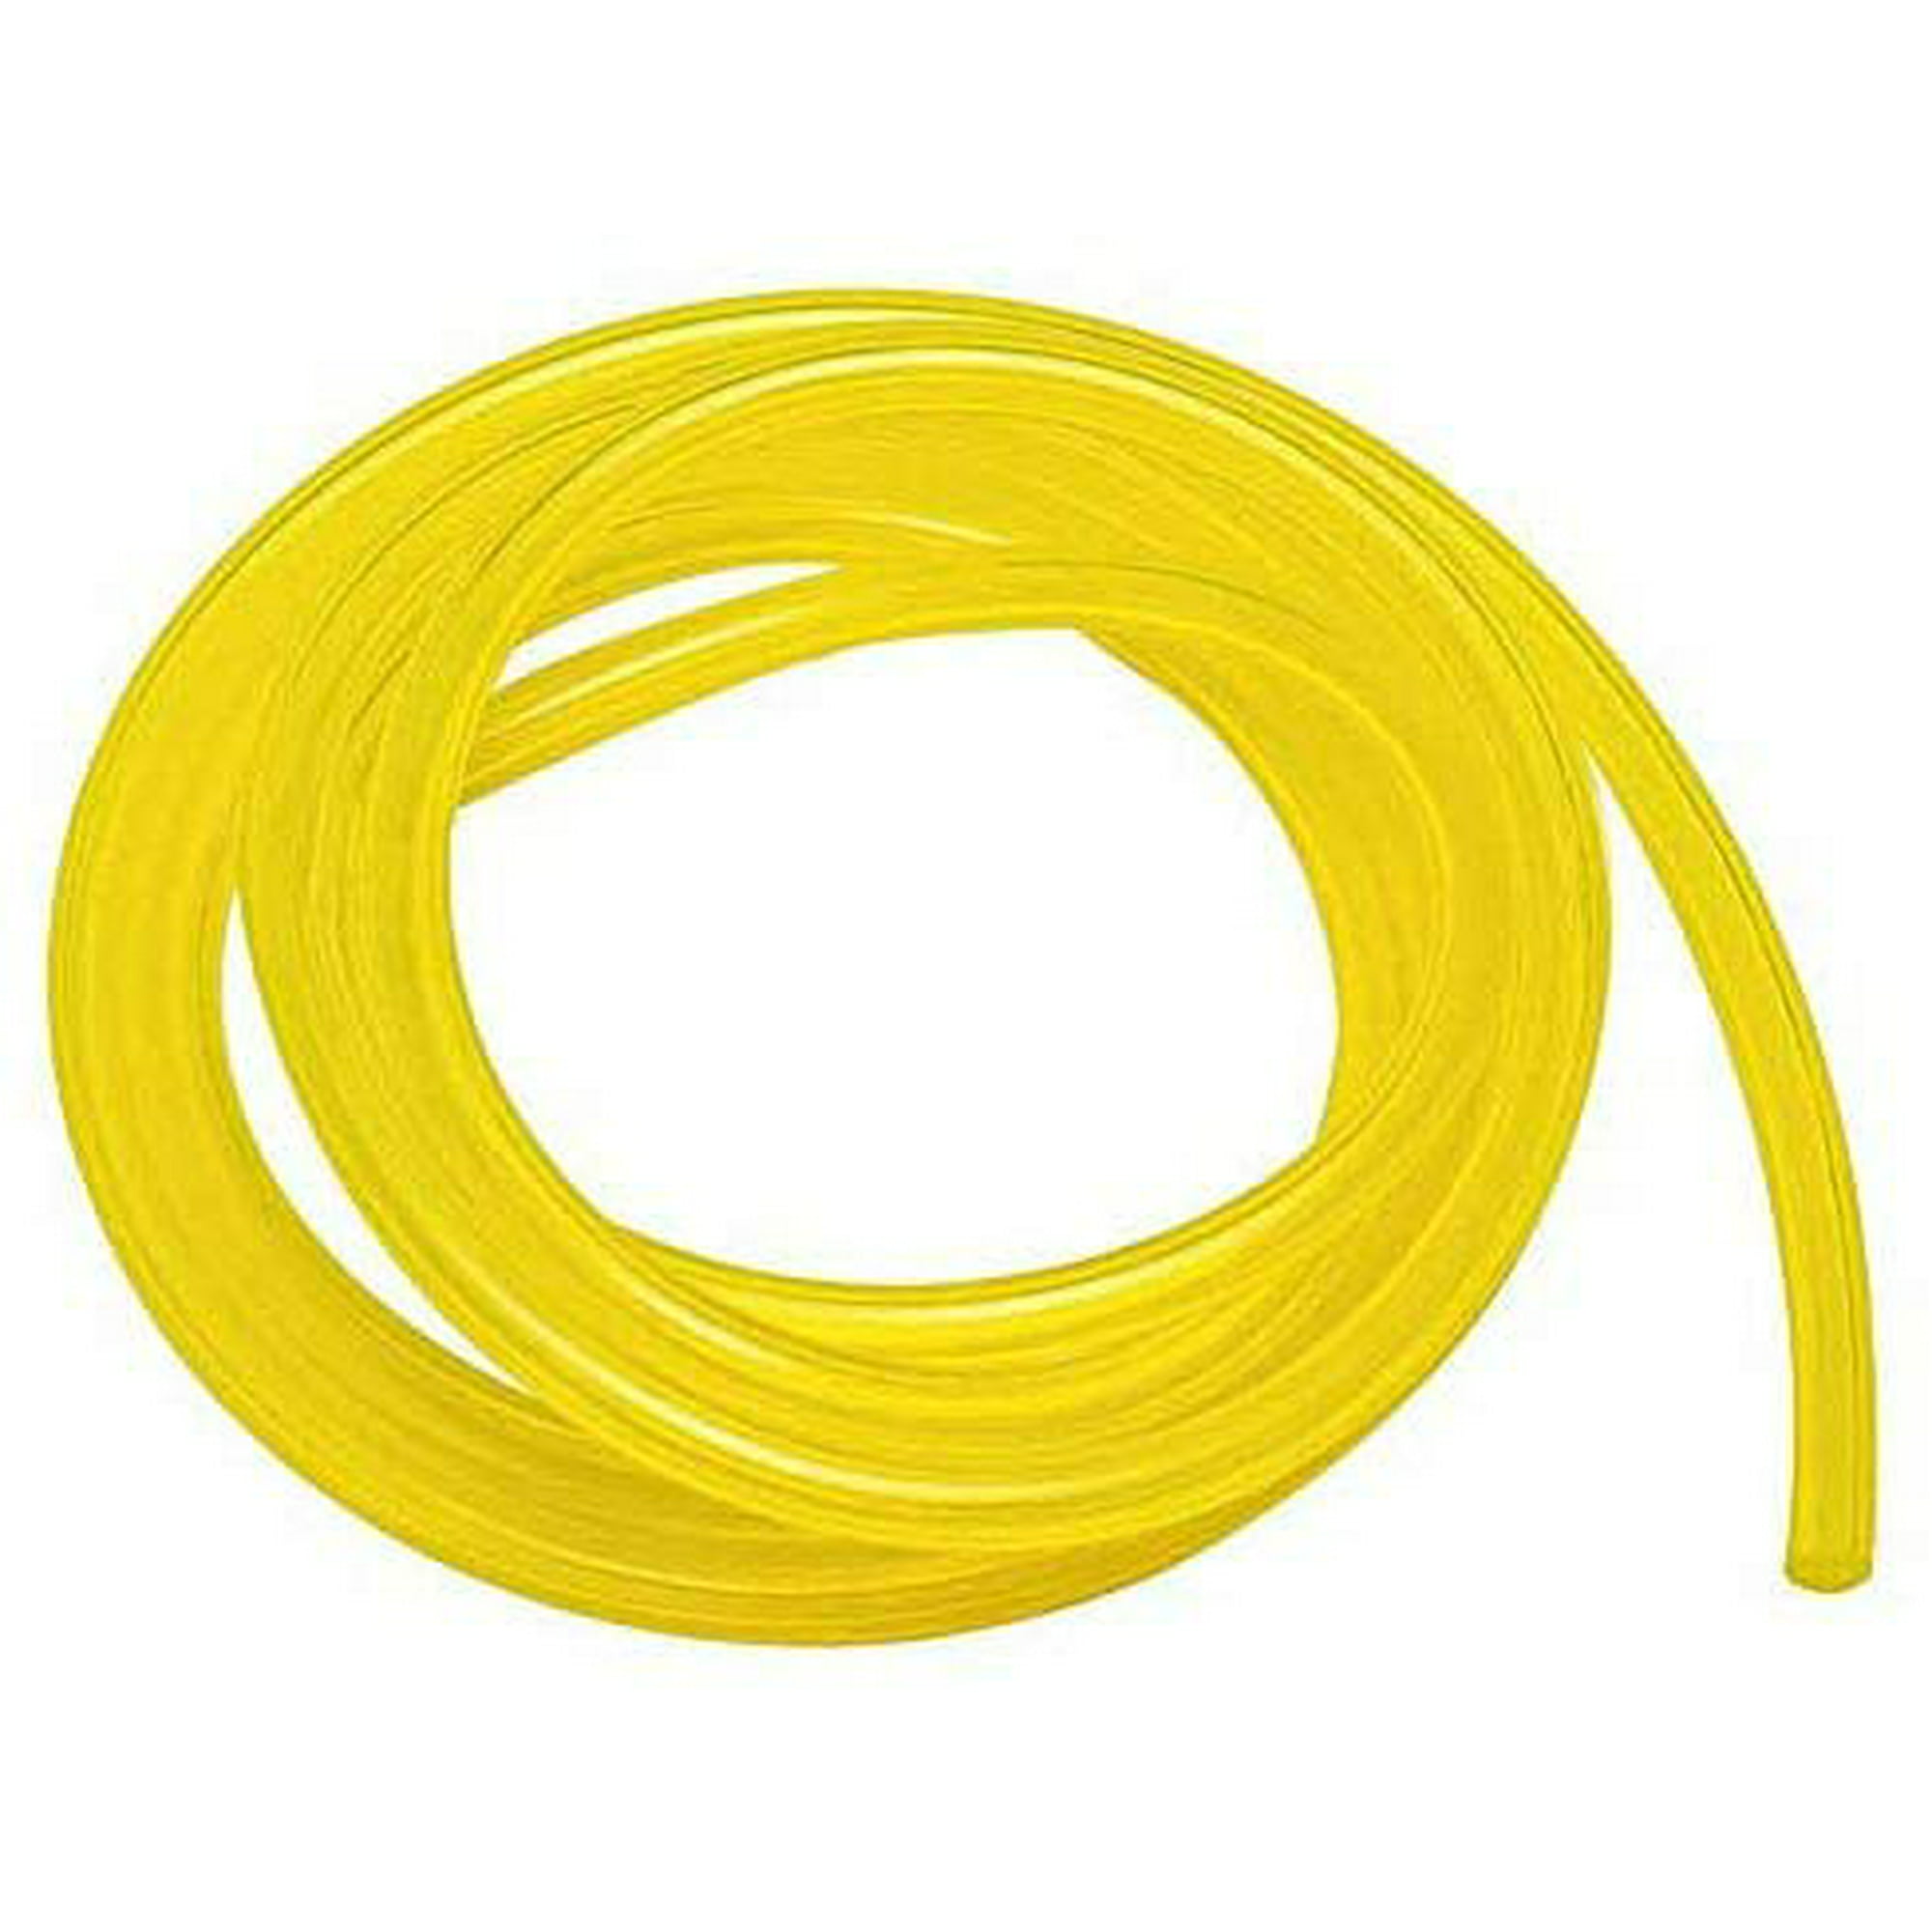 32 Feet 2 x 3.5mm Fuel Line For Chainsaw Blower Trimmer Weed Whacker Engine Part